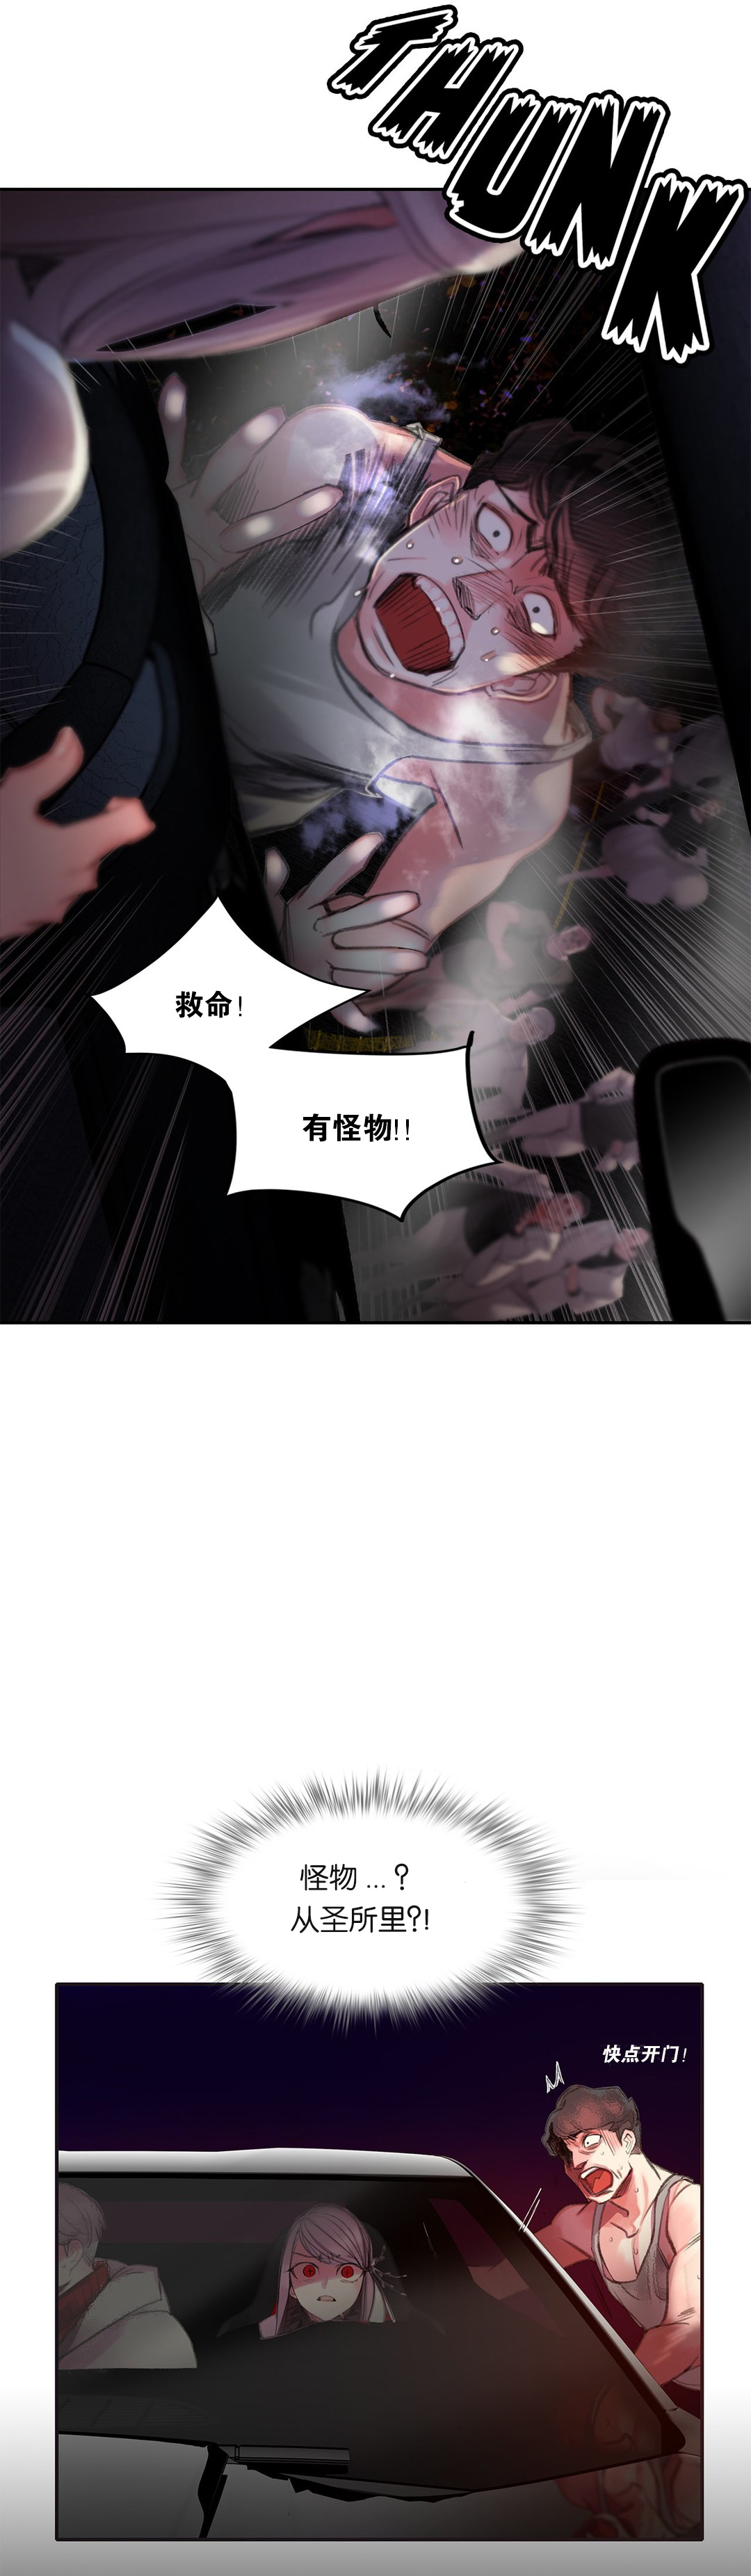 [Juder] Lilith`s Cord (第二季) Ch.61-64 [Chinese] [aaatwist个人汉化] [Ongoing] page 15 full